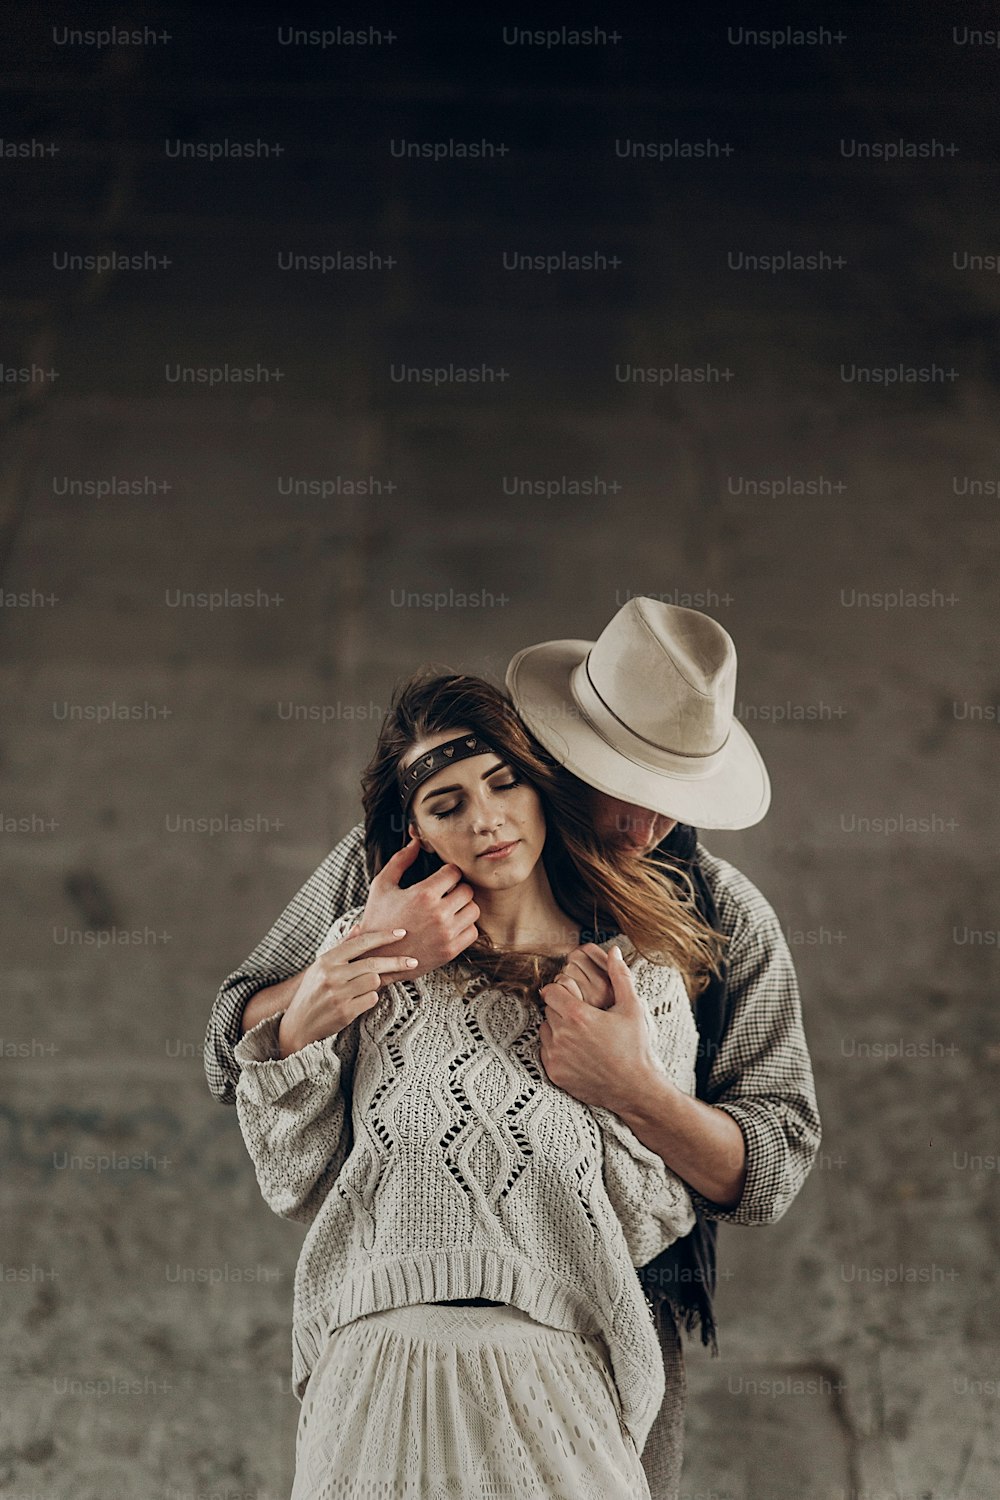 Handsome cowboy man in white hat touching cheek of beautiful boho gypsy woman with leather headband, posing outdoors